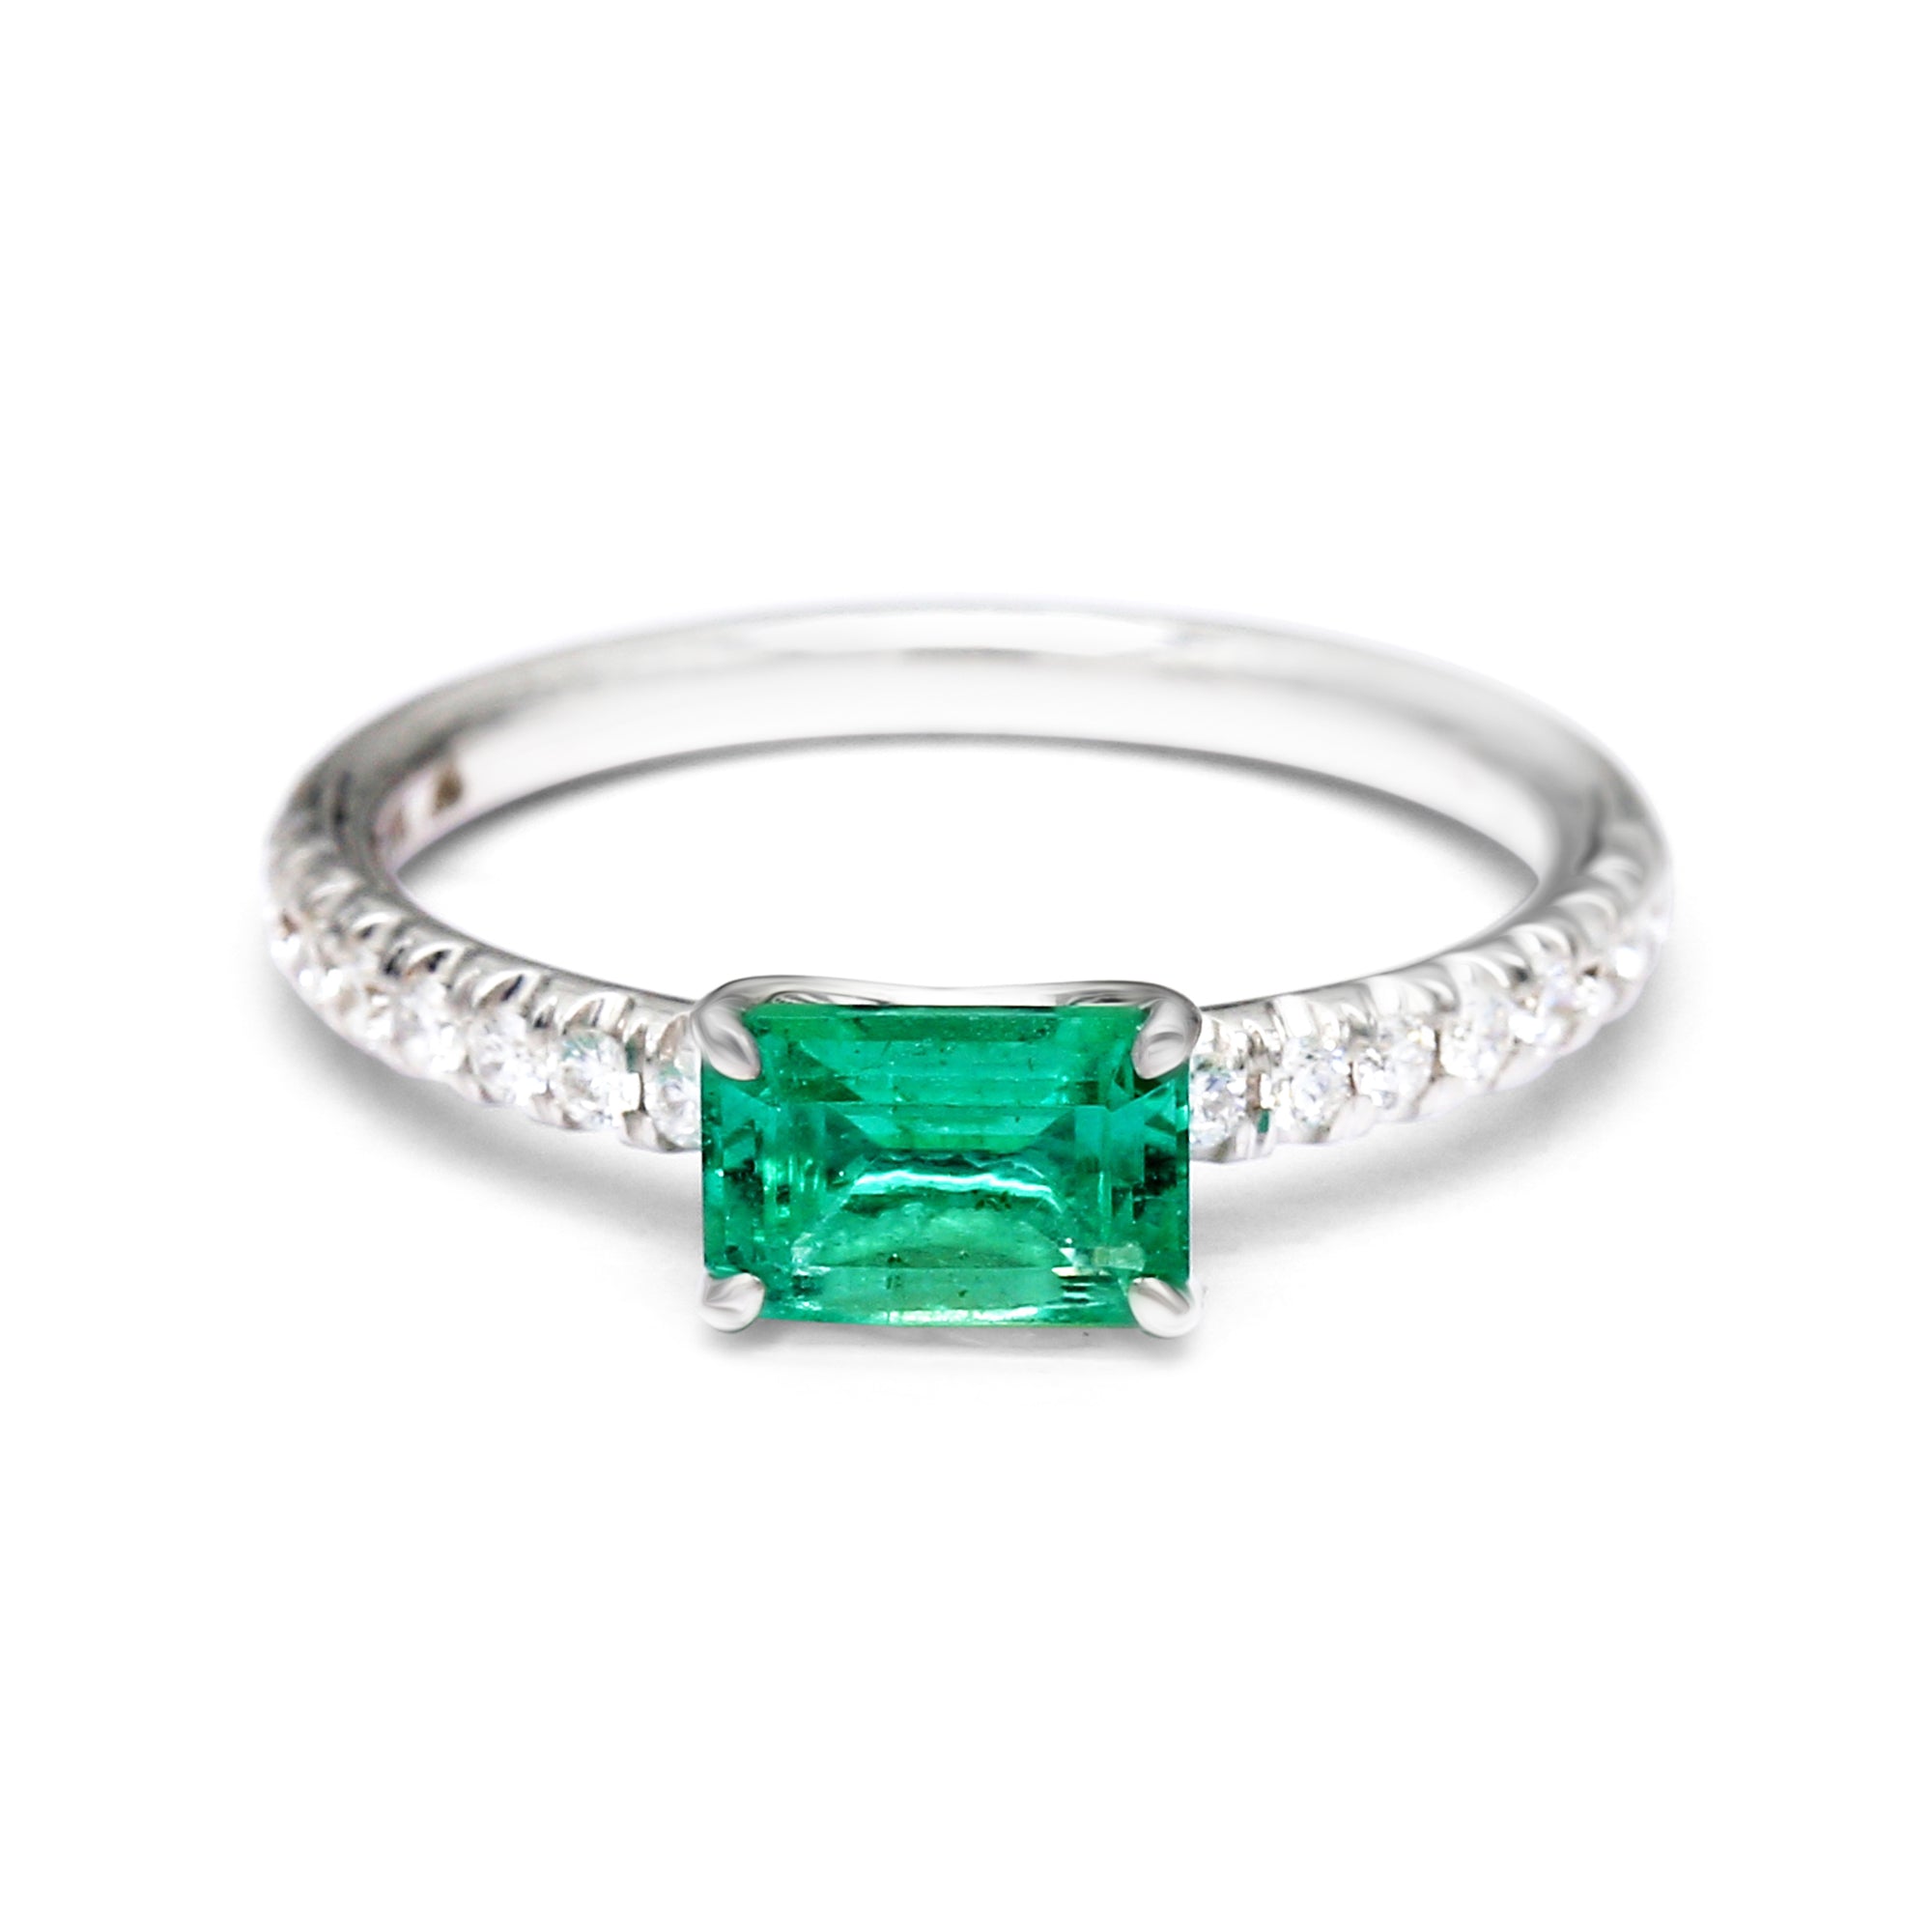 Emerald with Diamonds East-West Ring - 1.21ct TW